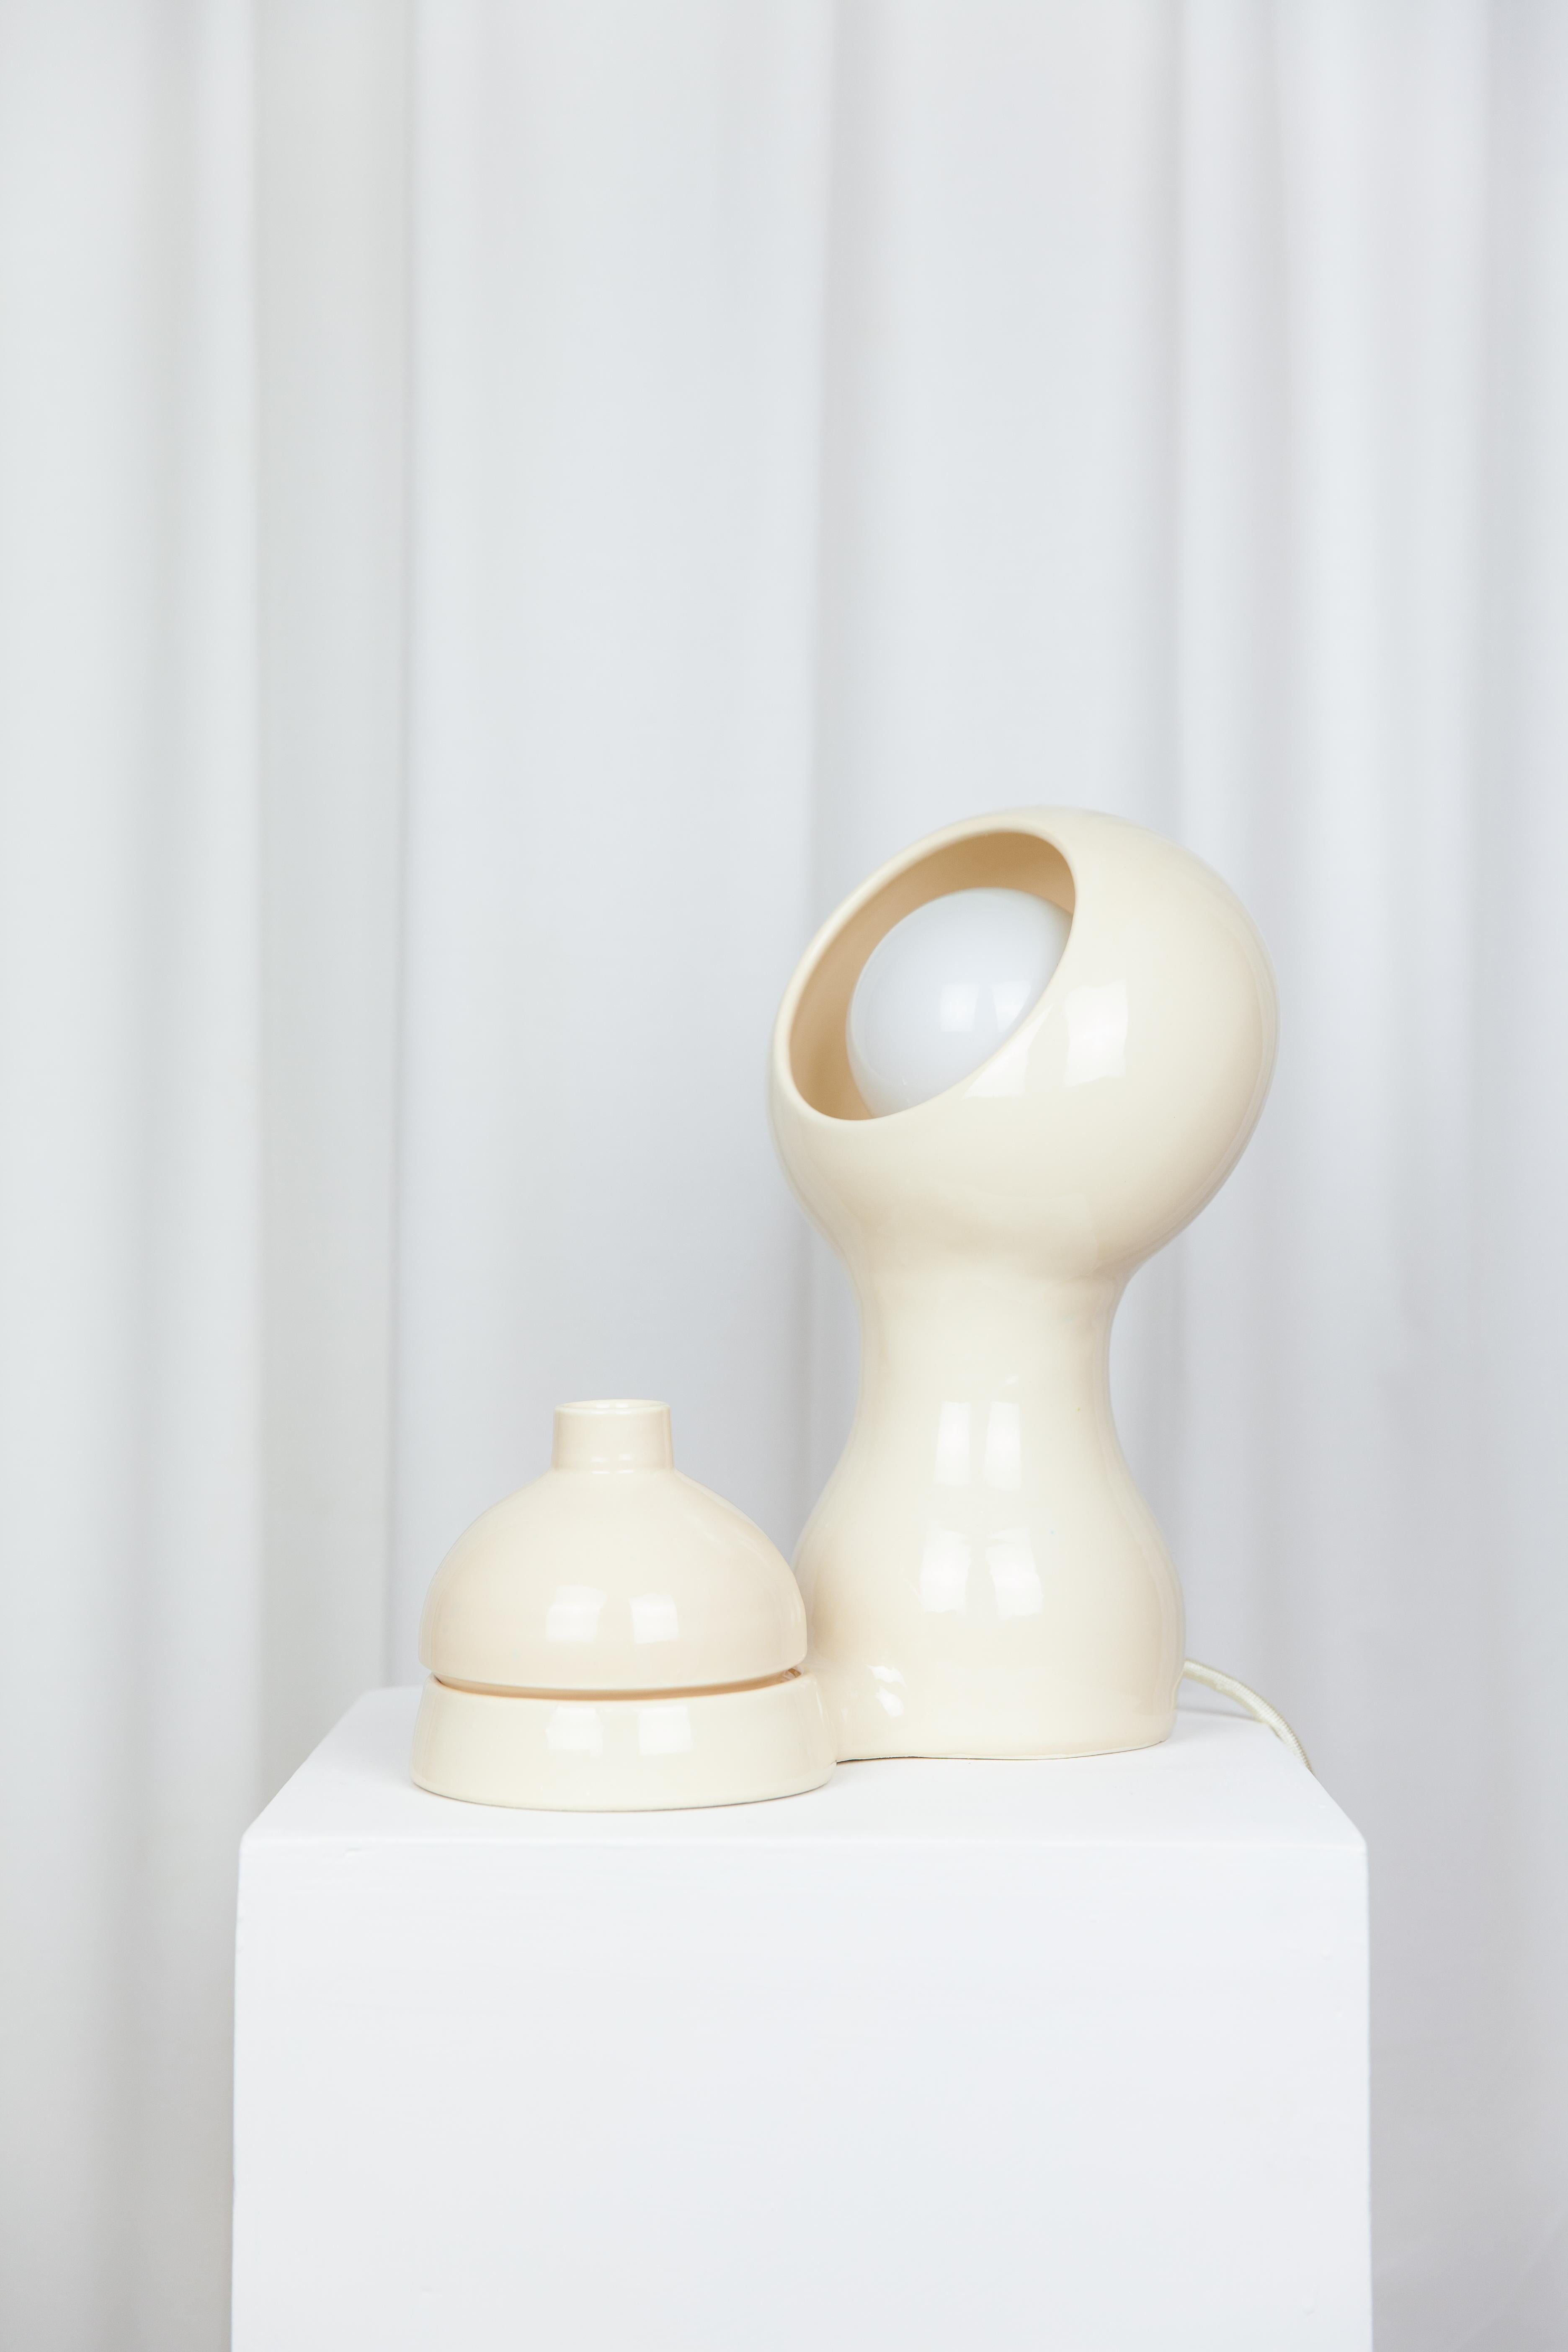 Glob Beige lamp + vase by Lola Mayeras
Dimensions: D29 x W 18 x W 32 cm
Materials: Earthenware.
Other colours available.

Lamp with detachable vase, white earthenware, glazed in beige.
This piece is designed and handcrafted in the south of